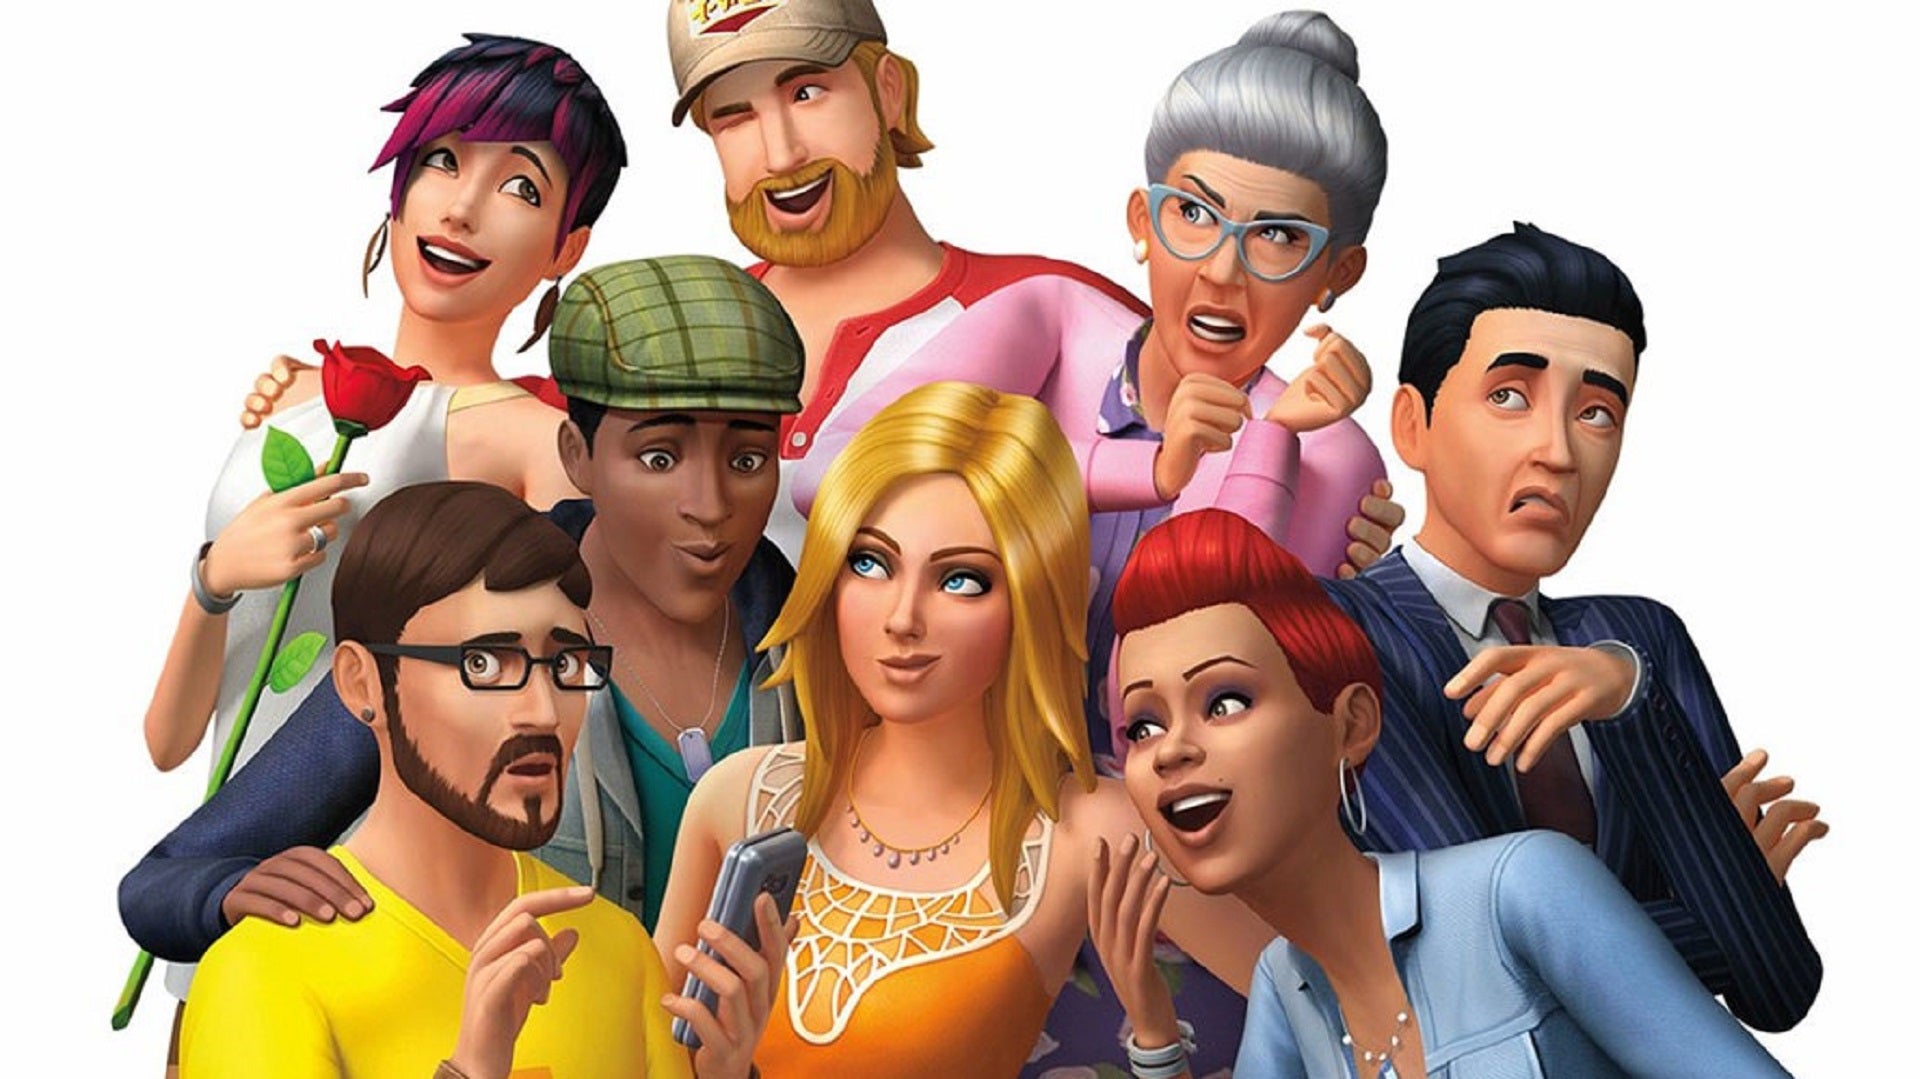 The sims 4 android